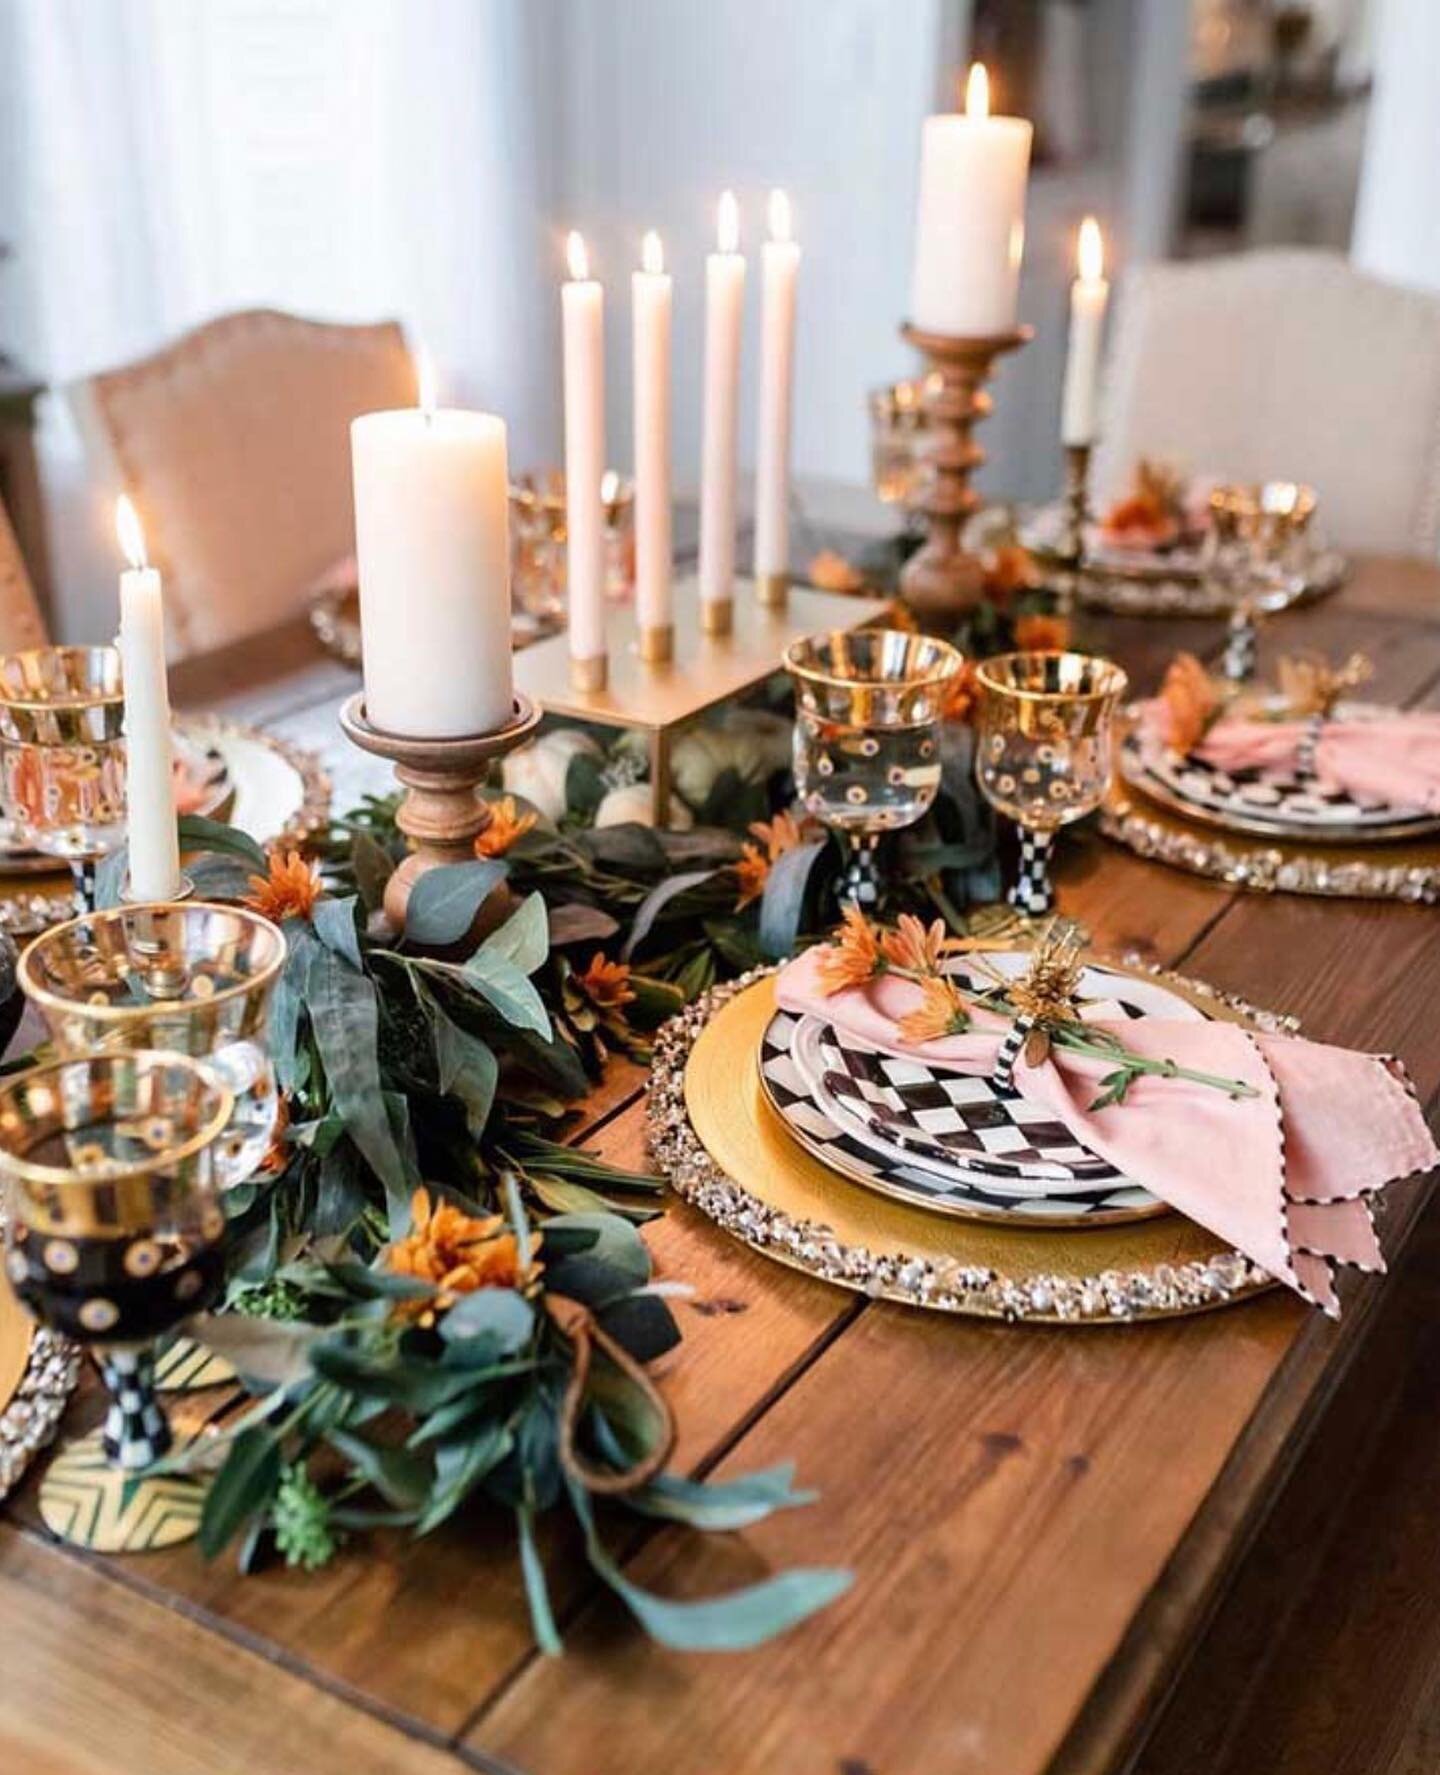 Thanksgiving is my all-time favorite holiday ❤️✨Thought I&rsquo;d share some holiday tablescapes that are inspiring me this season. I especially love the electric blue table runner used by @annabode &ndash; all about mixing the traditions up with som